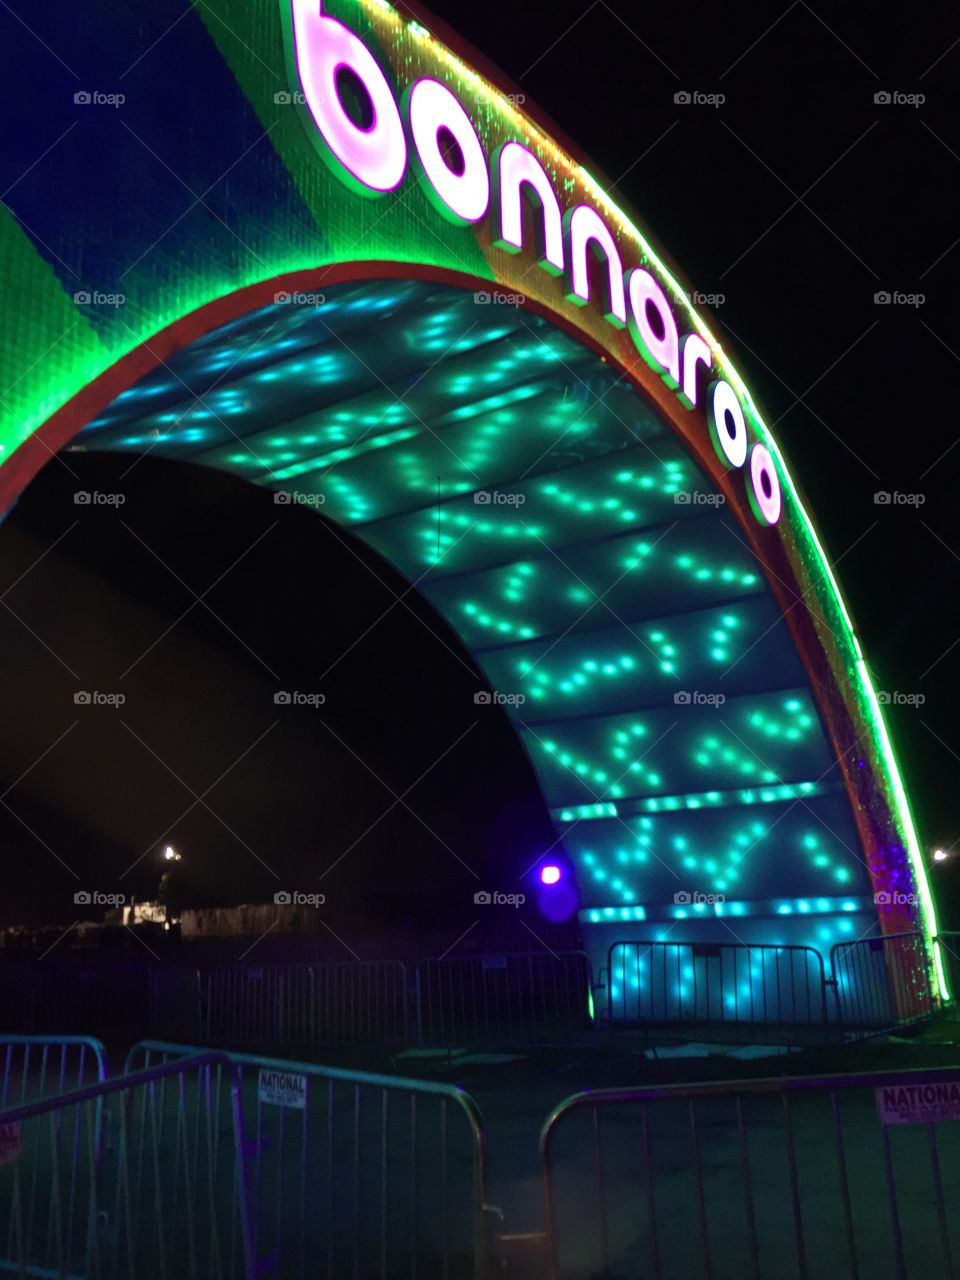 Roo arch 15